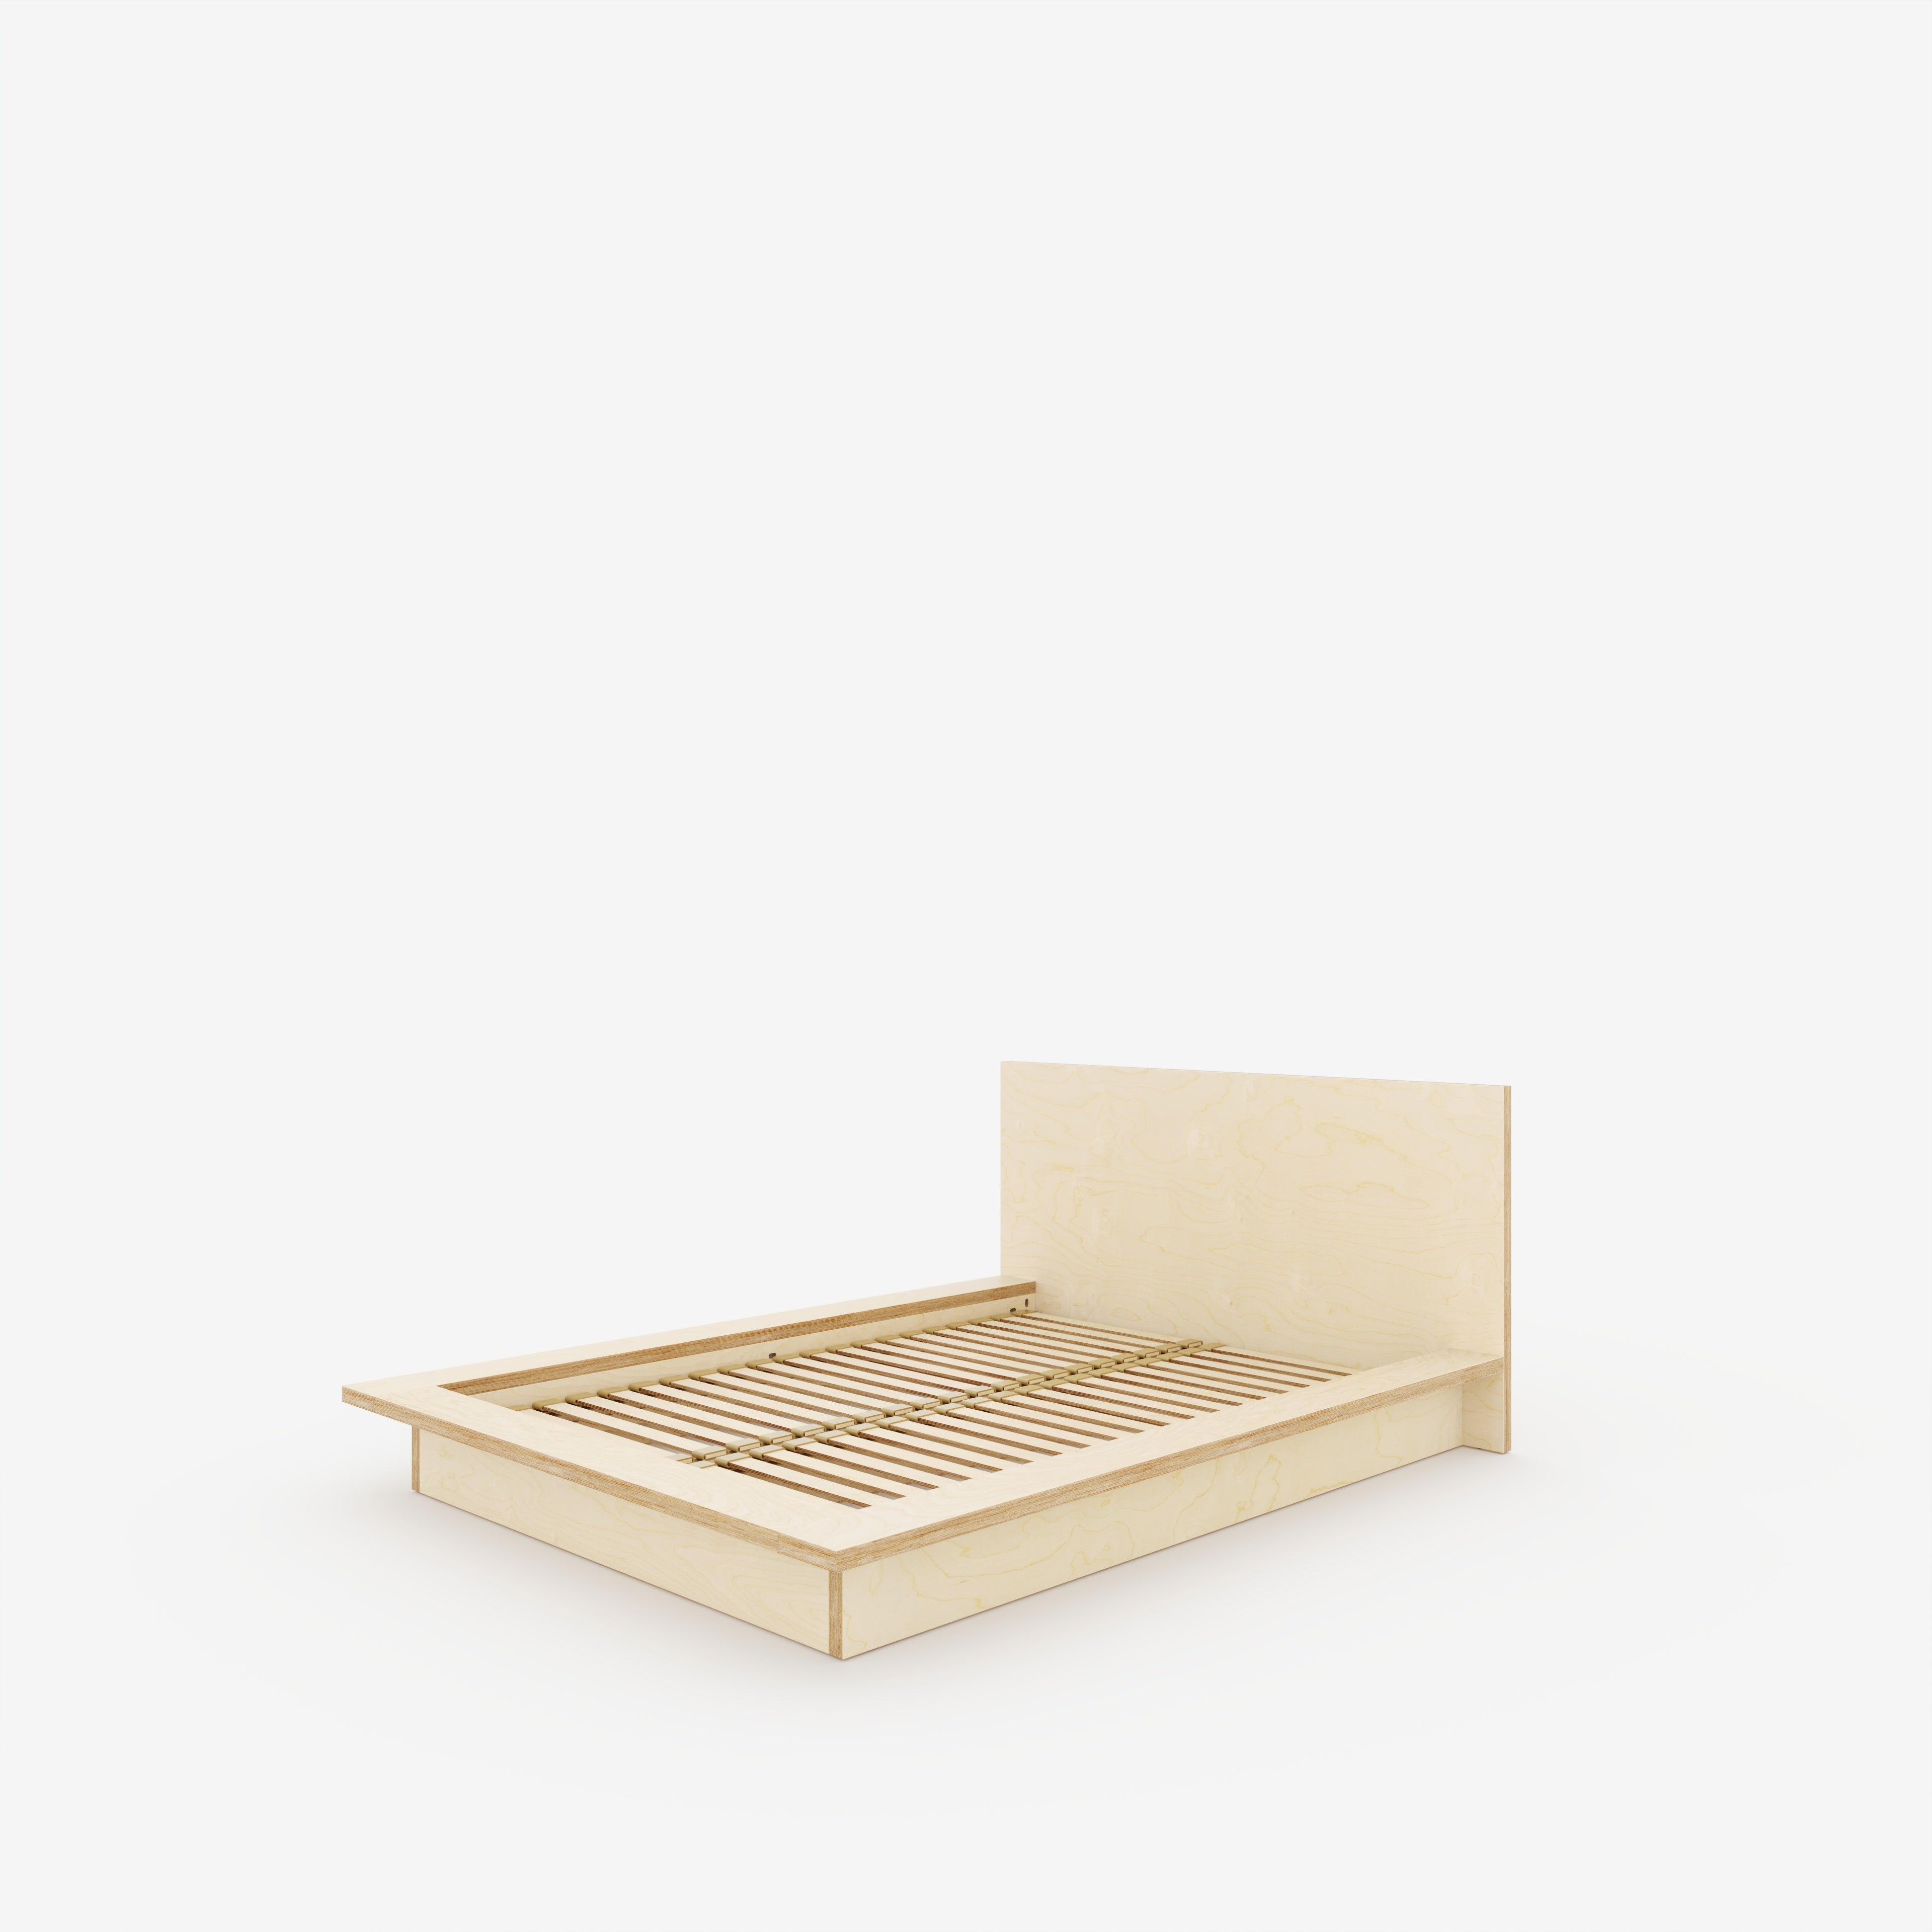 Plywood Platform Bed - Plywood Birch - European Double 1400(w) x 2000(d) Low